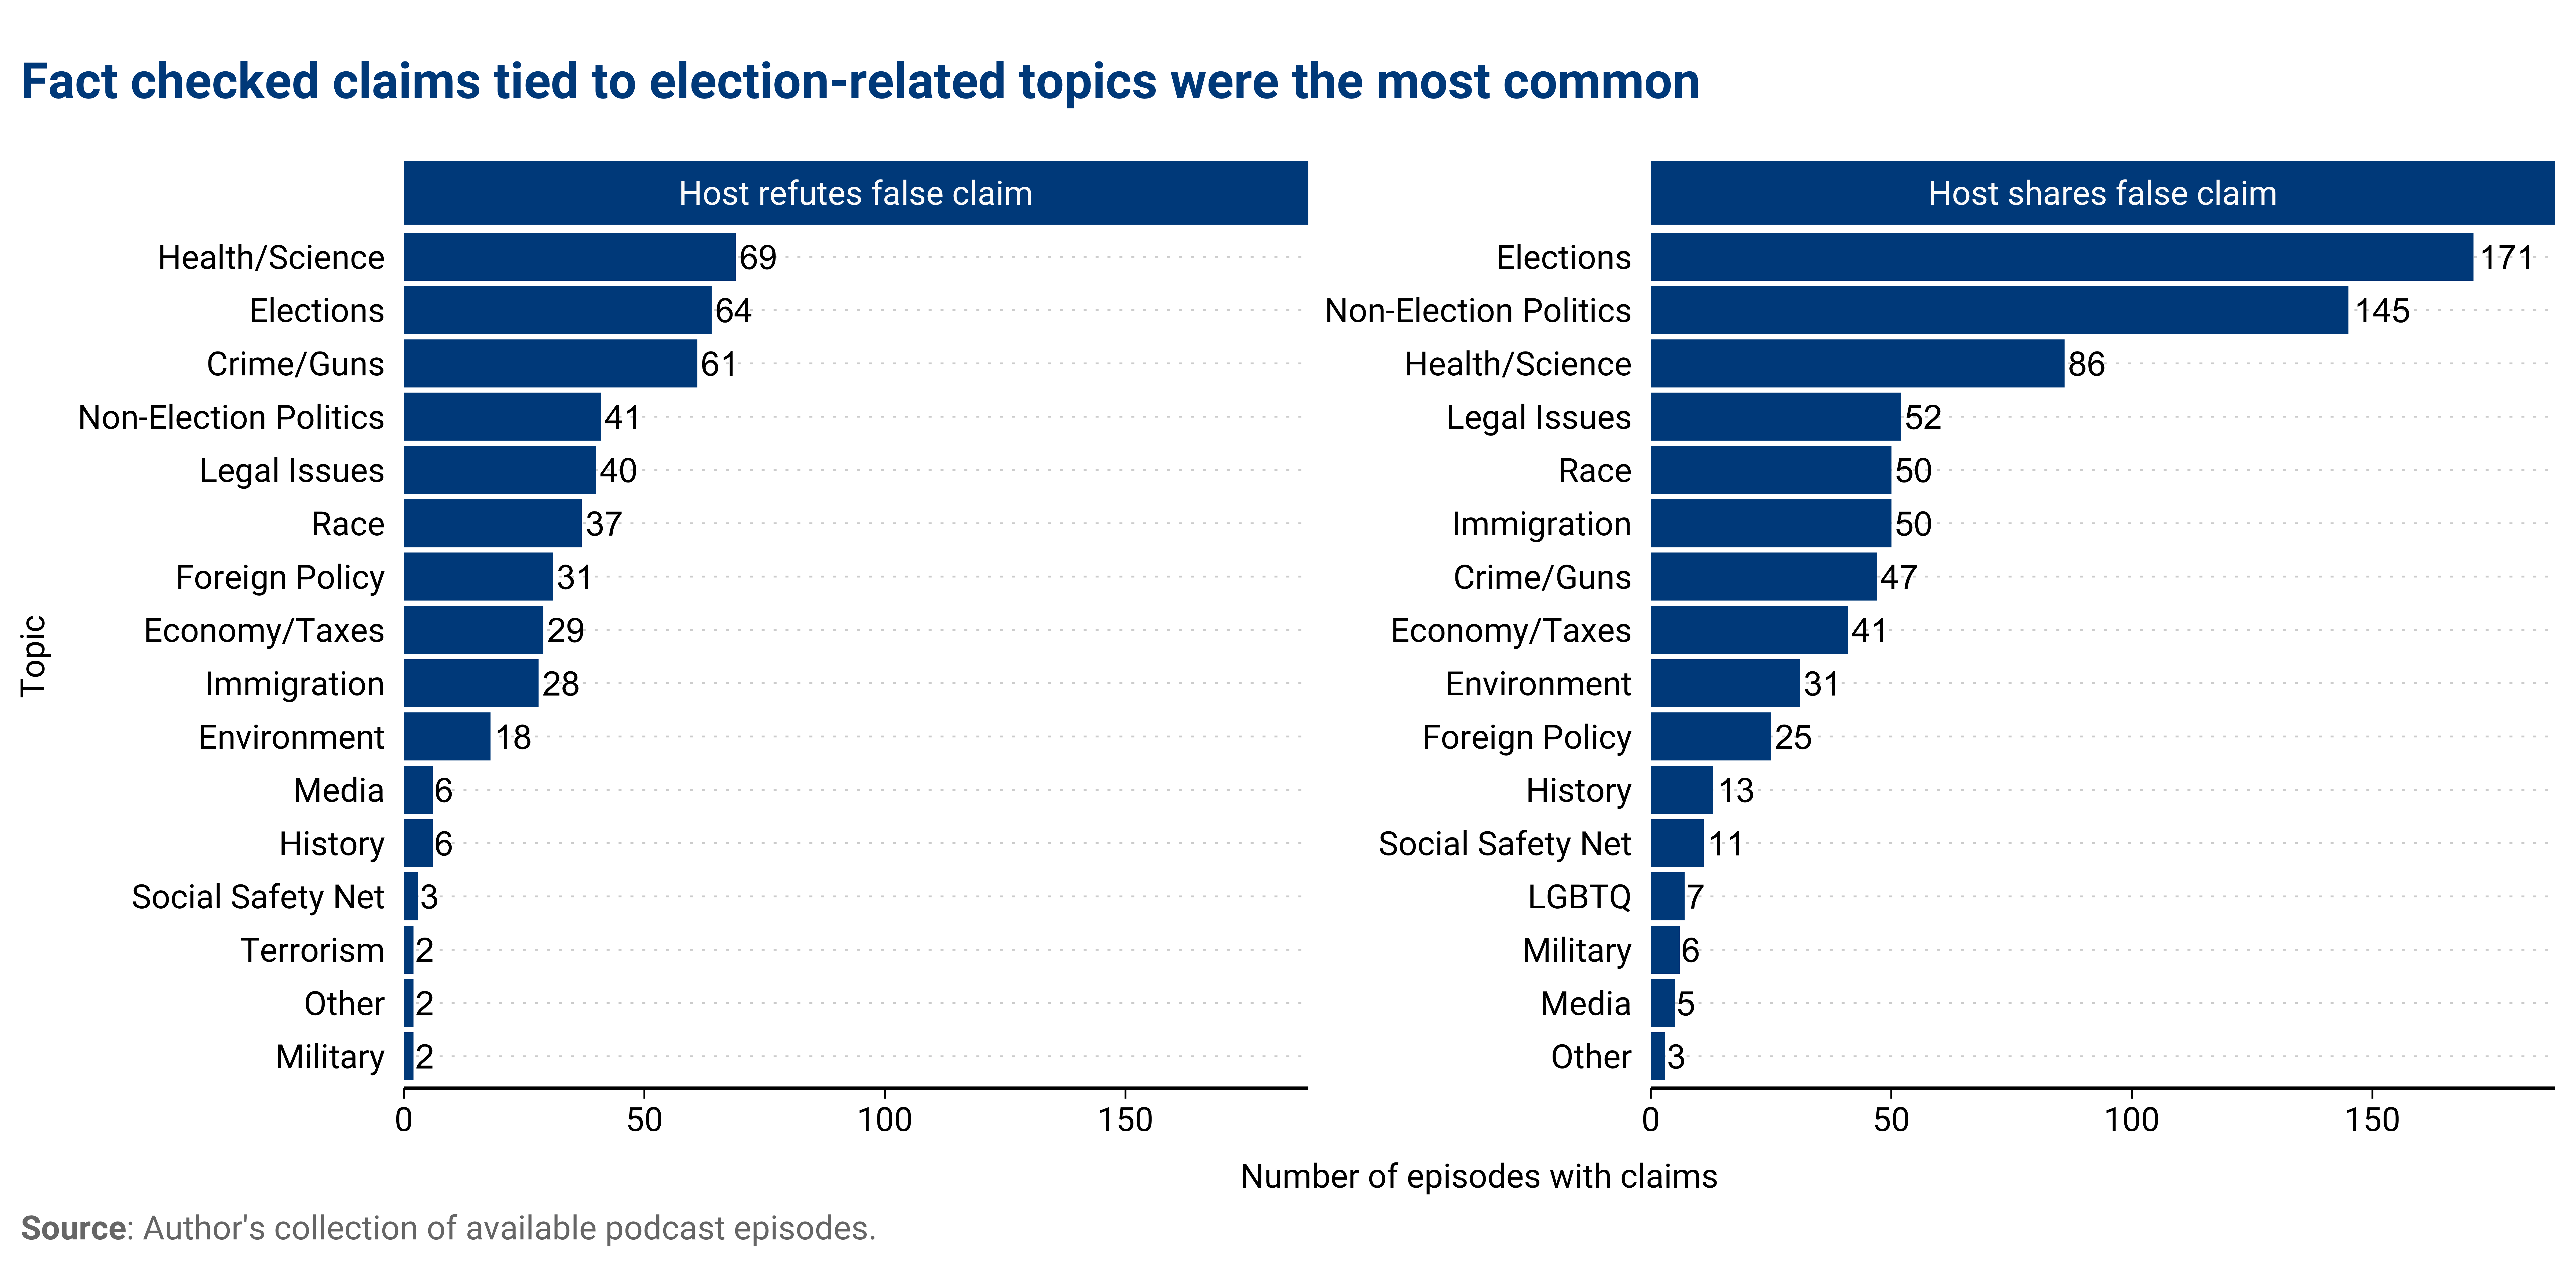 Figure: The fact checks shared in the dataset focused on a wide range of topics, though elections, non-election politics, health and science, and crime and guns were among the most common subjects for podcasters who refuted and shared false claims